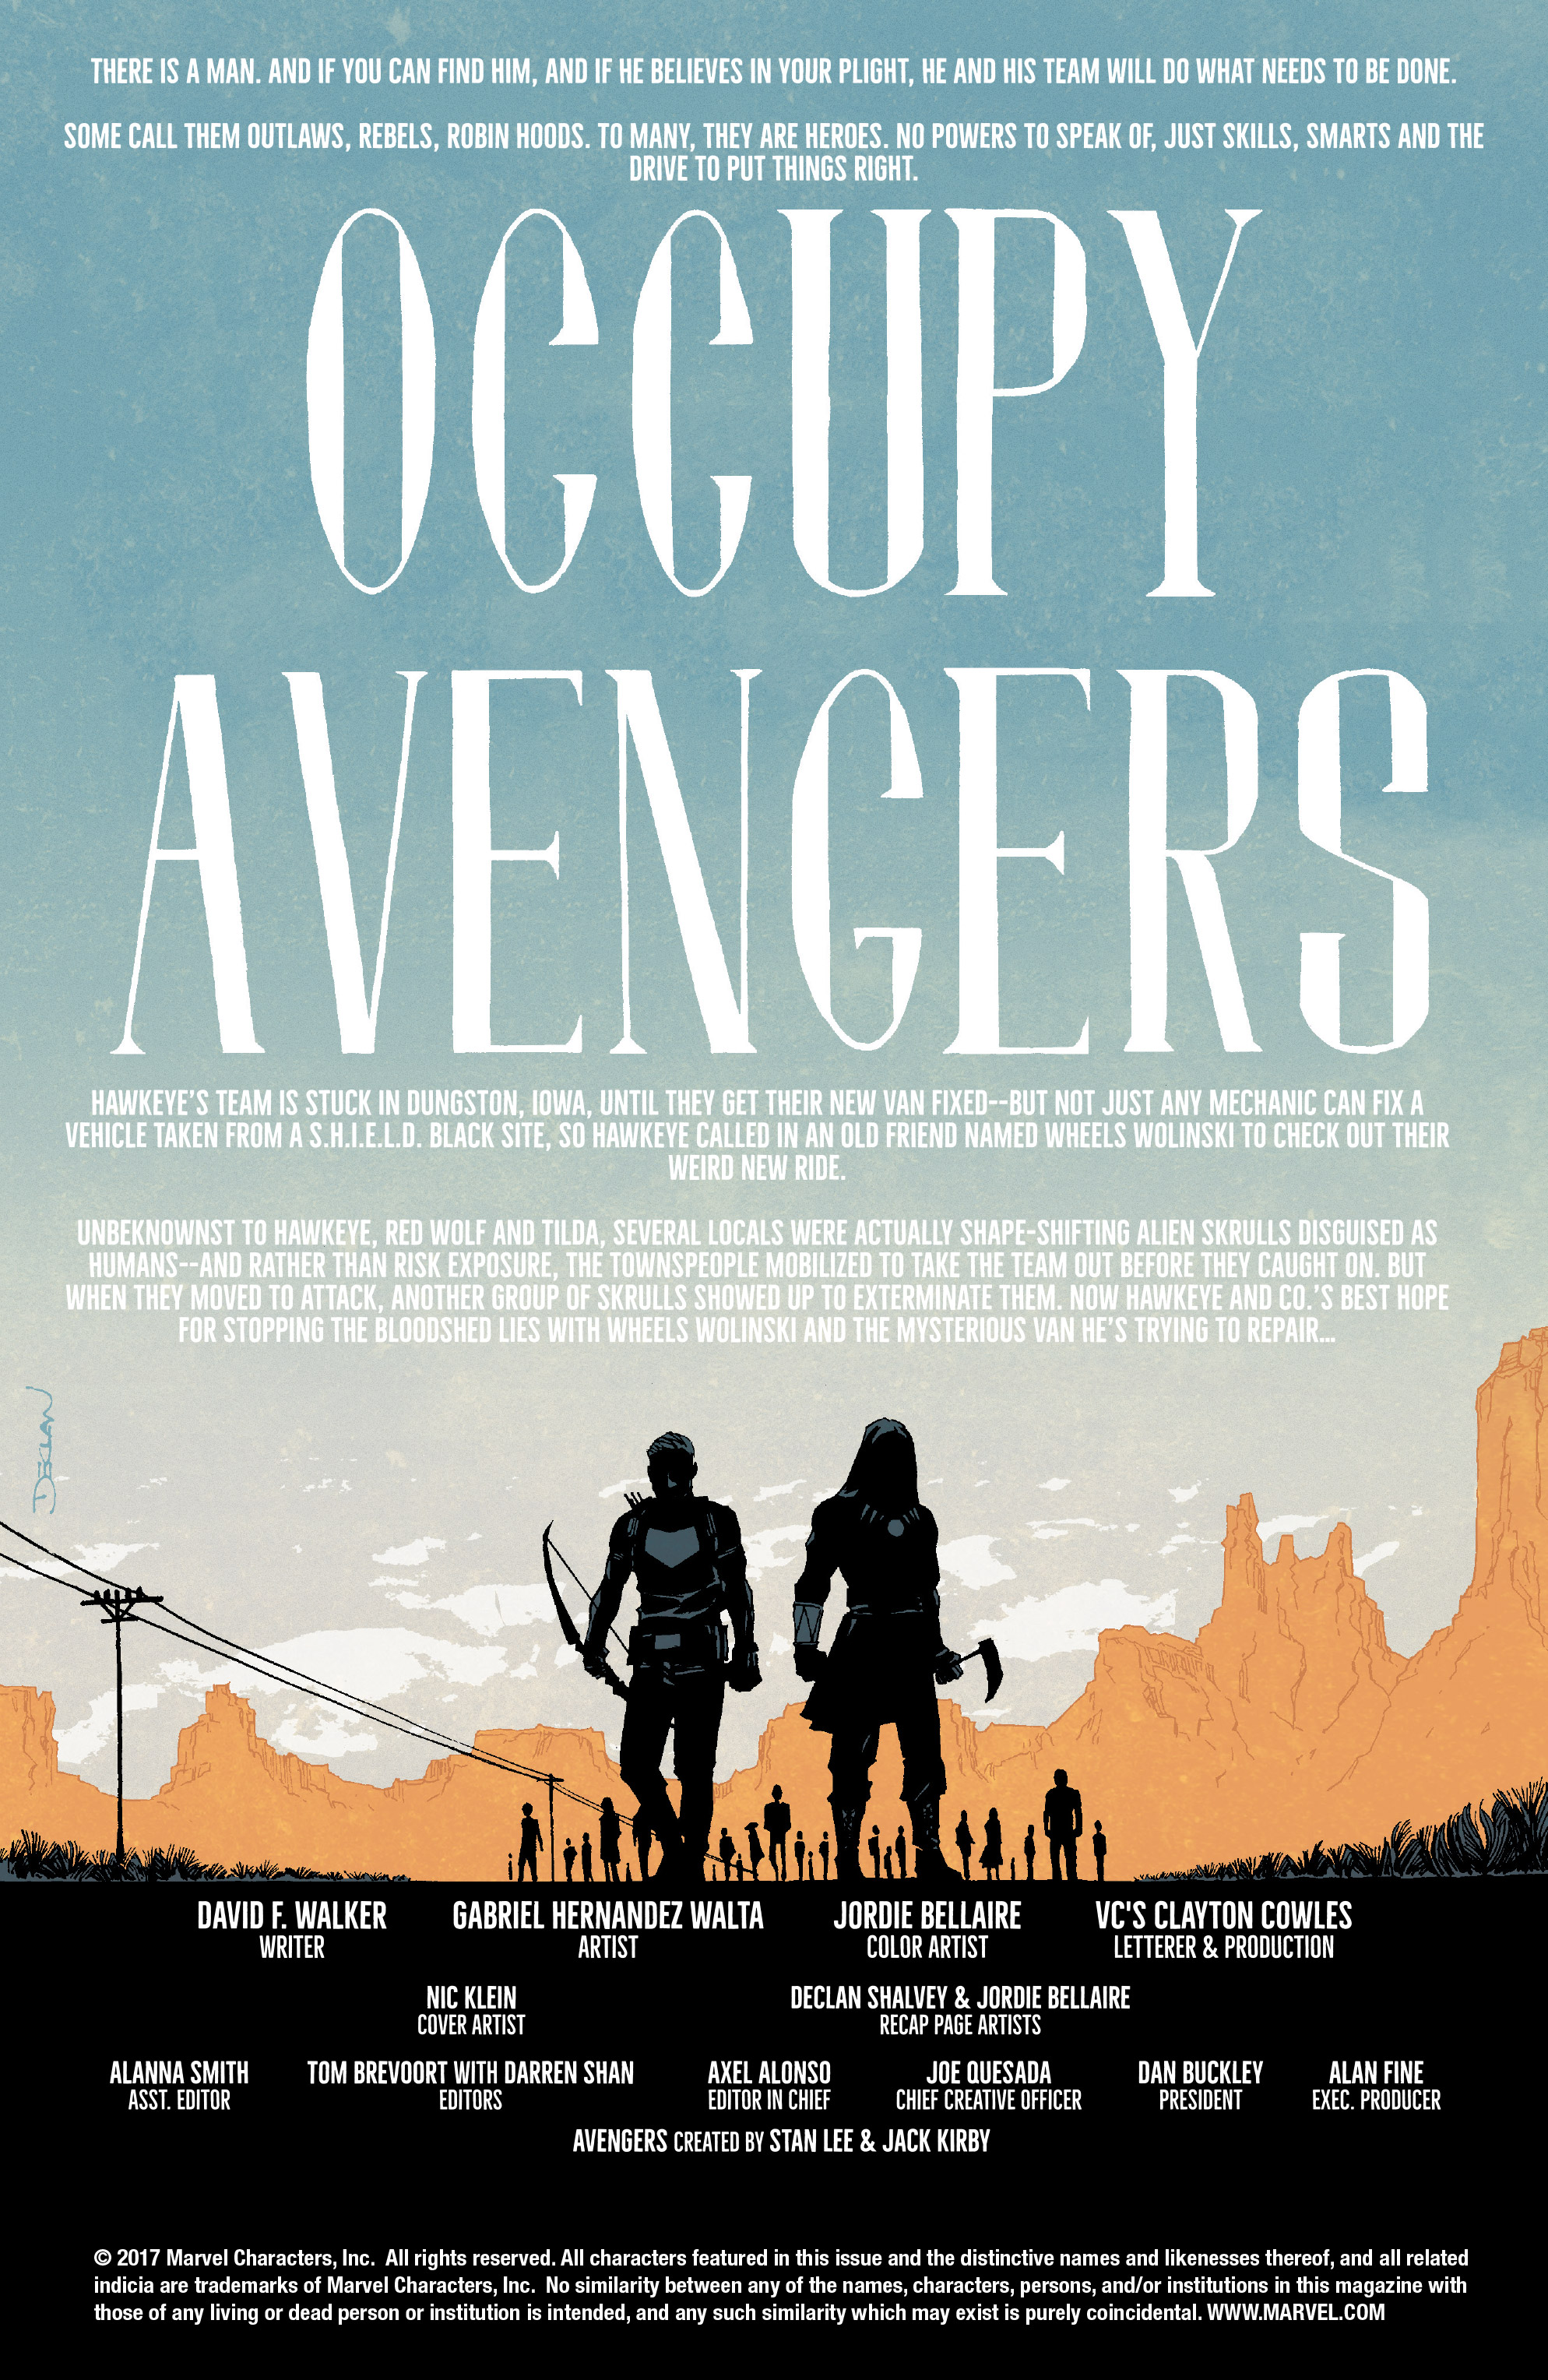 Read online Occupy Avengers comic -  Issue #7 - 2